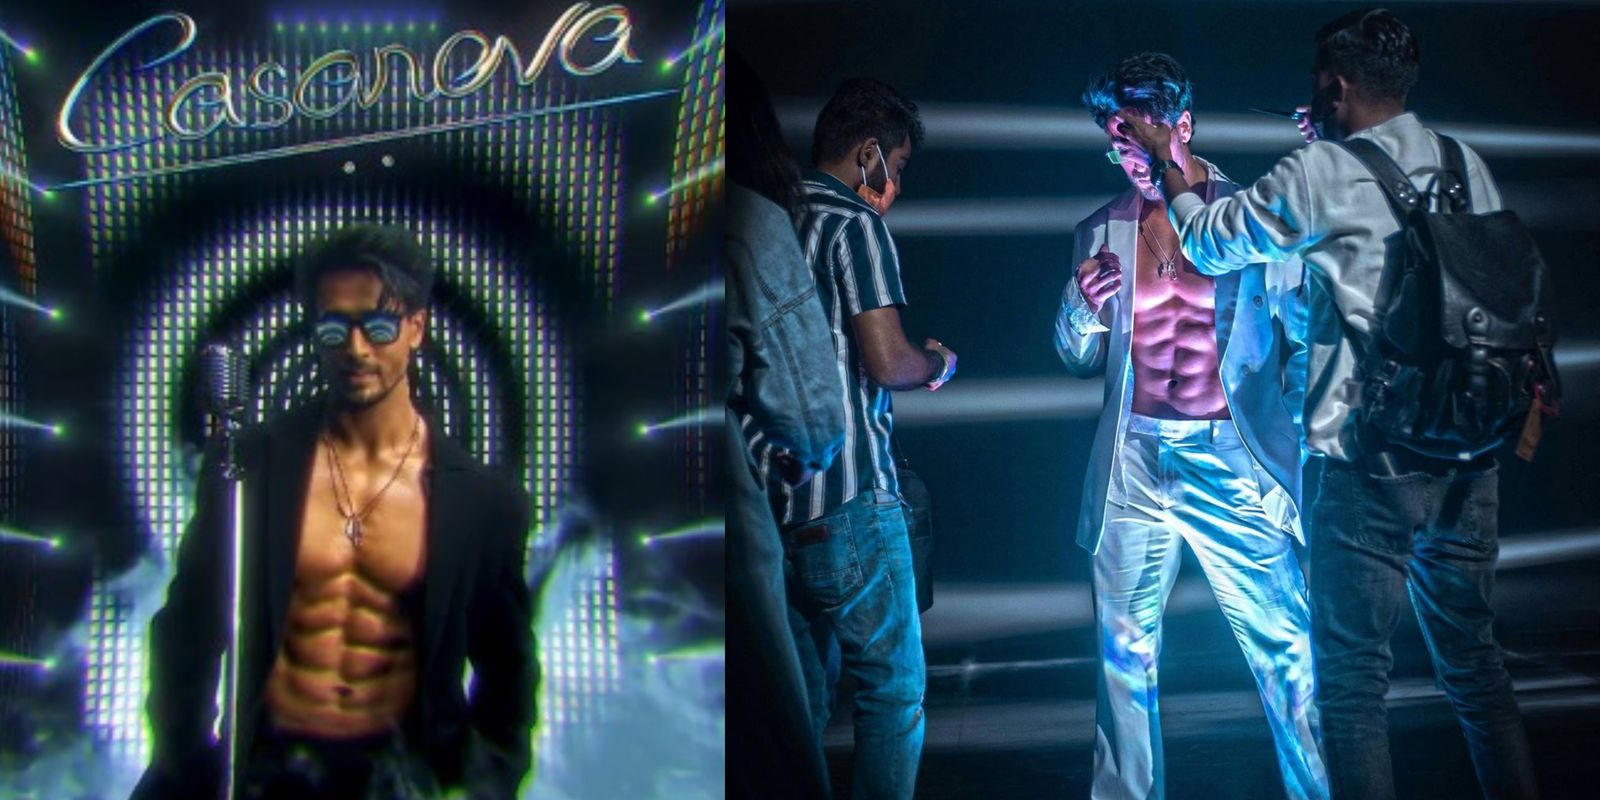 Tiger Shroff Announces Next Single Titled Casanova; Flaunts Sculpted Abs & Mesmerizing Smile In The First Look